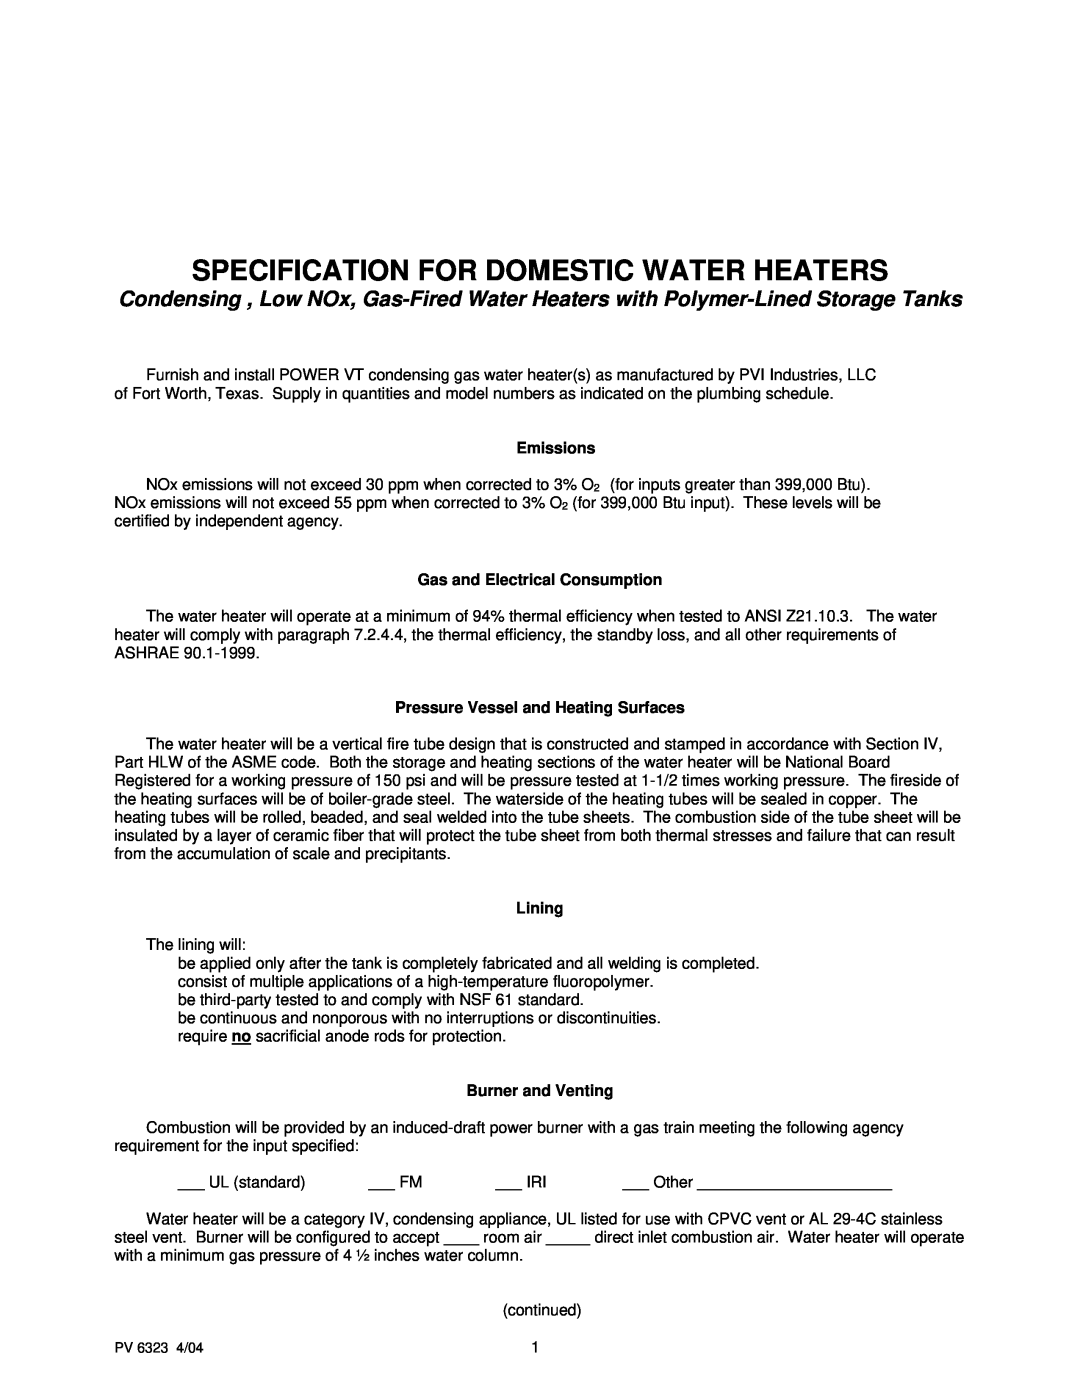 PVI Industries PV 6323 manual Specification For Domestic Water Heaters, Emissions, Gas and Electrical Consumption, Lining 